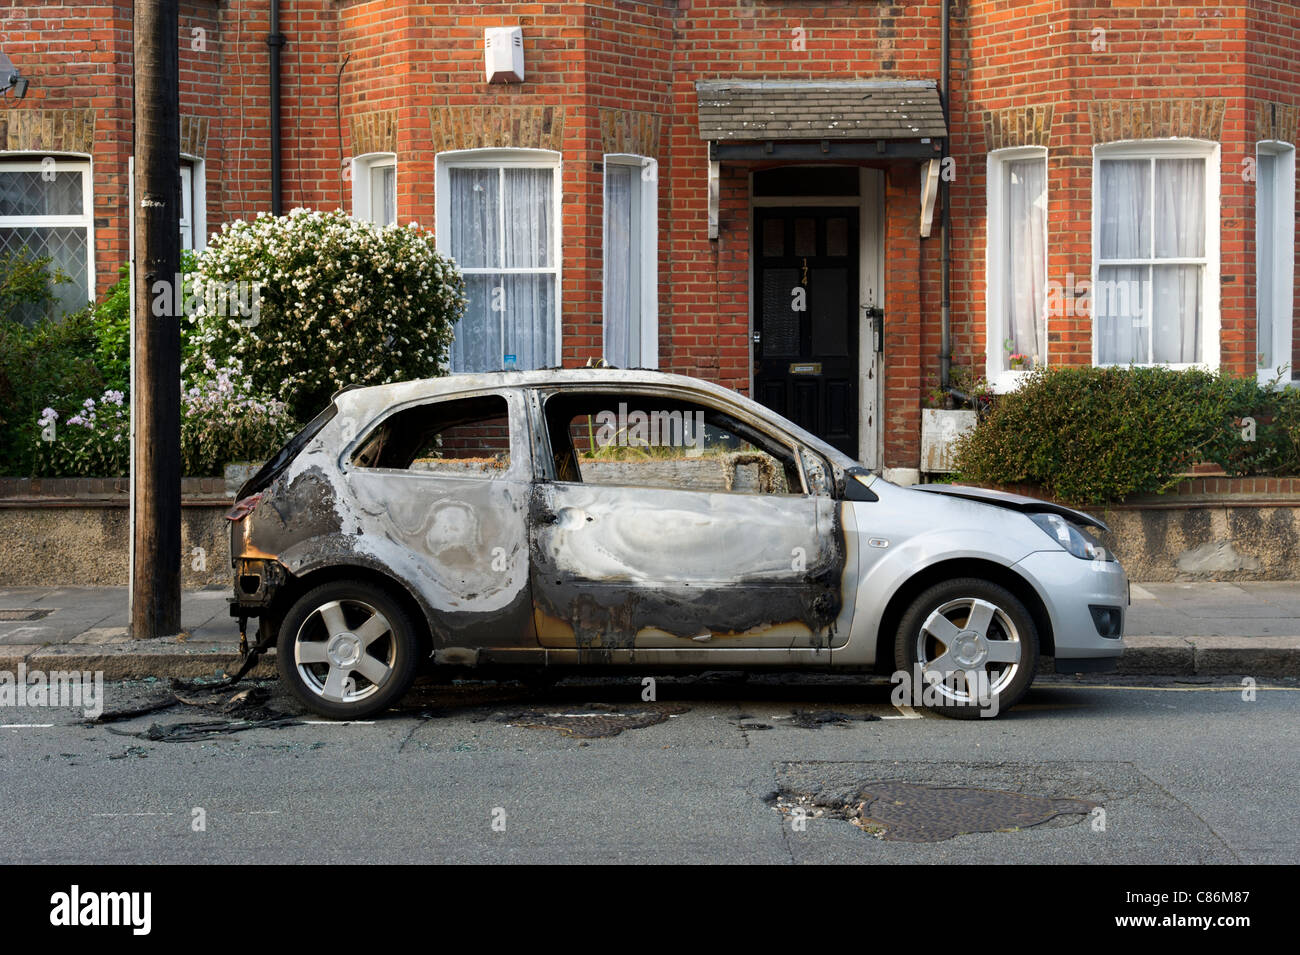 Burnt out car on residential street, London, England, UK Stock Photo